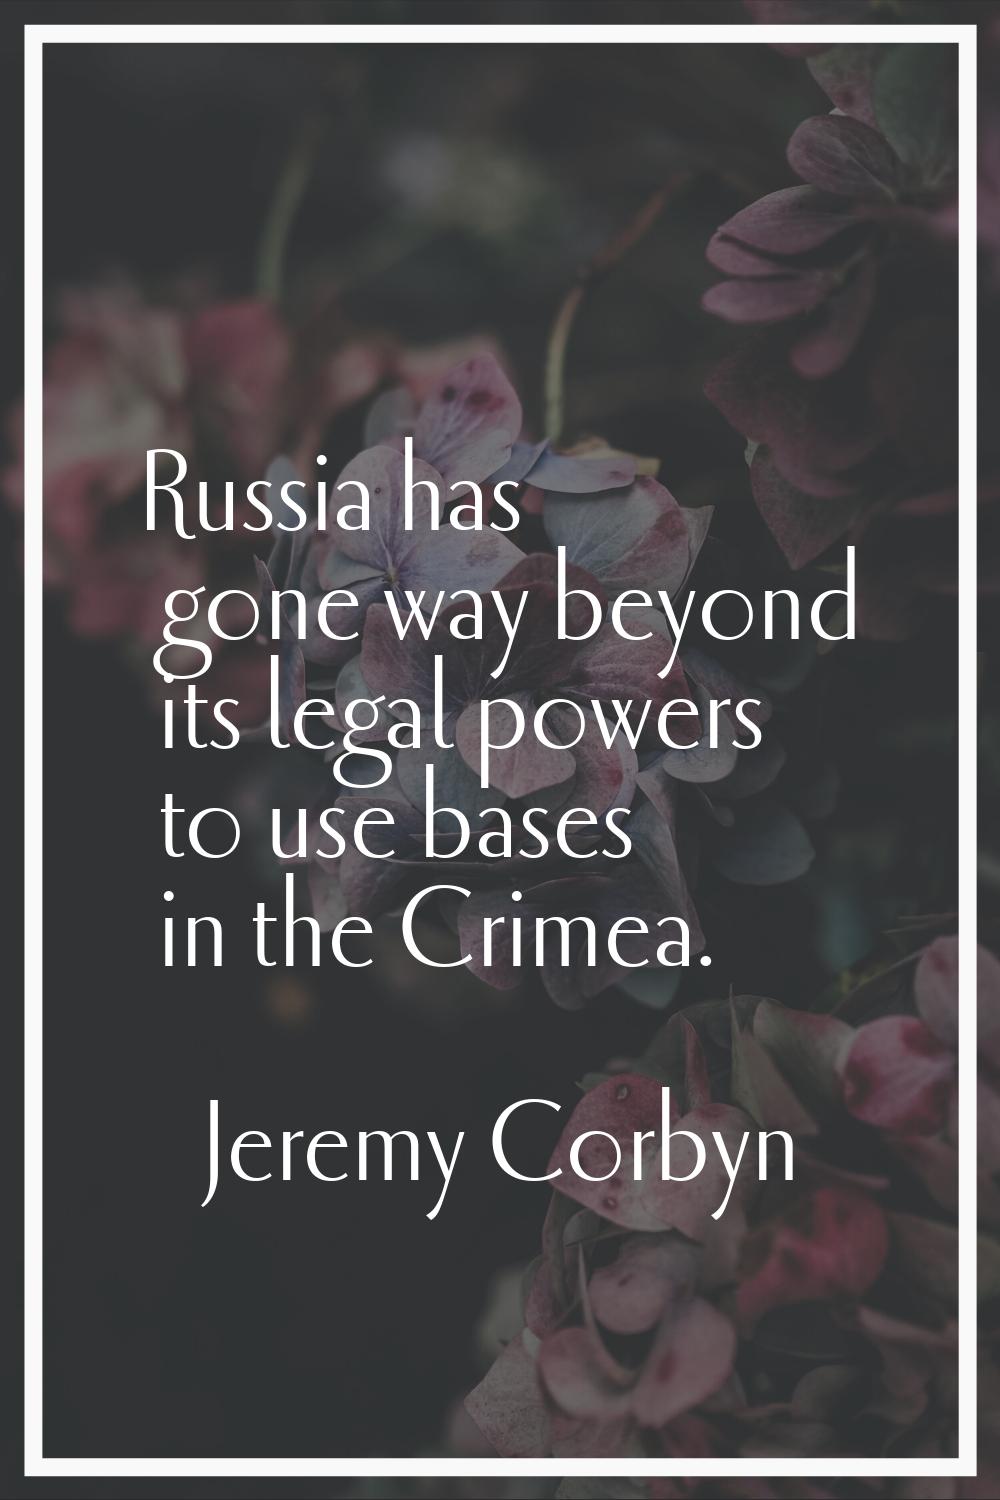 Russia has gone way beyond its legal powers to use bases in the Crimea.